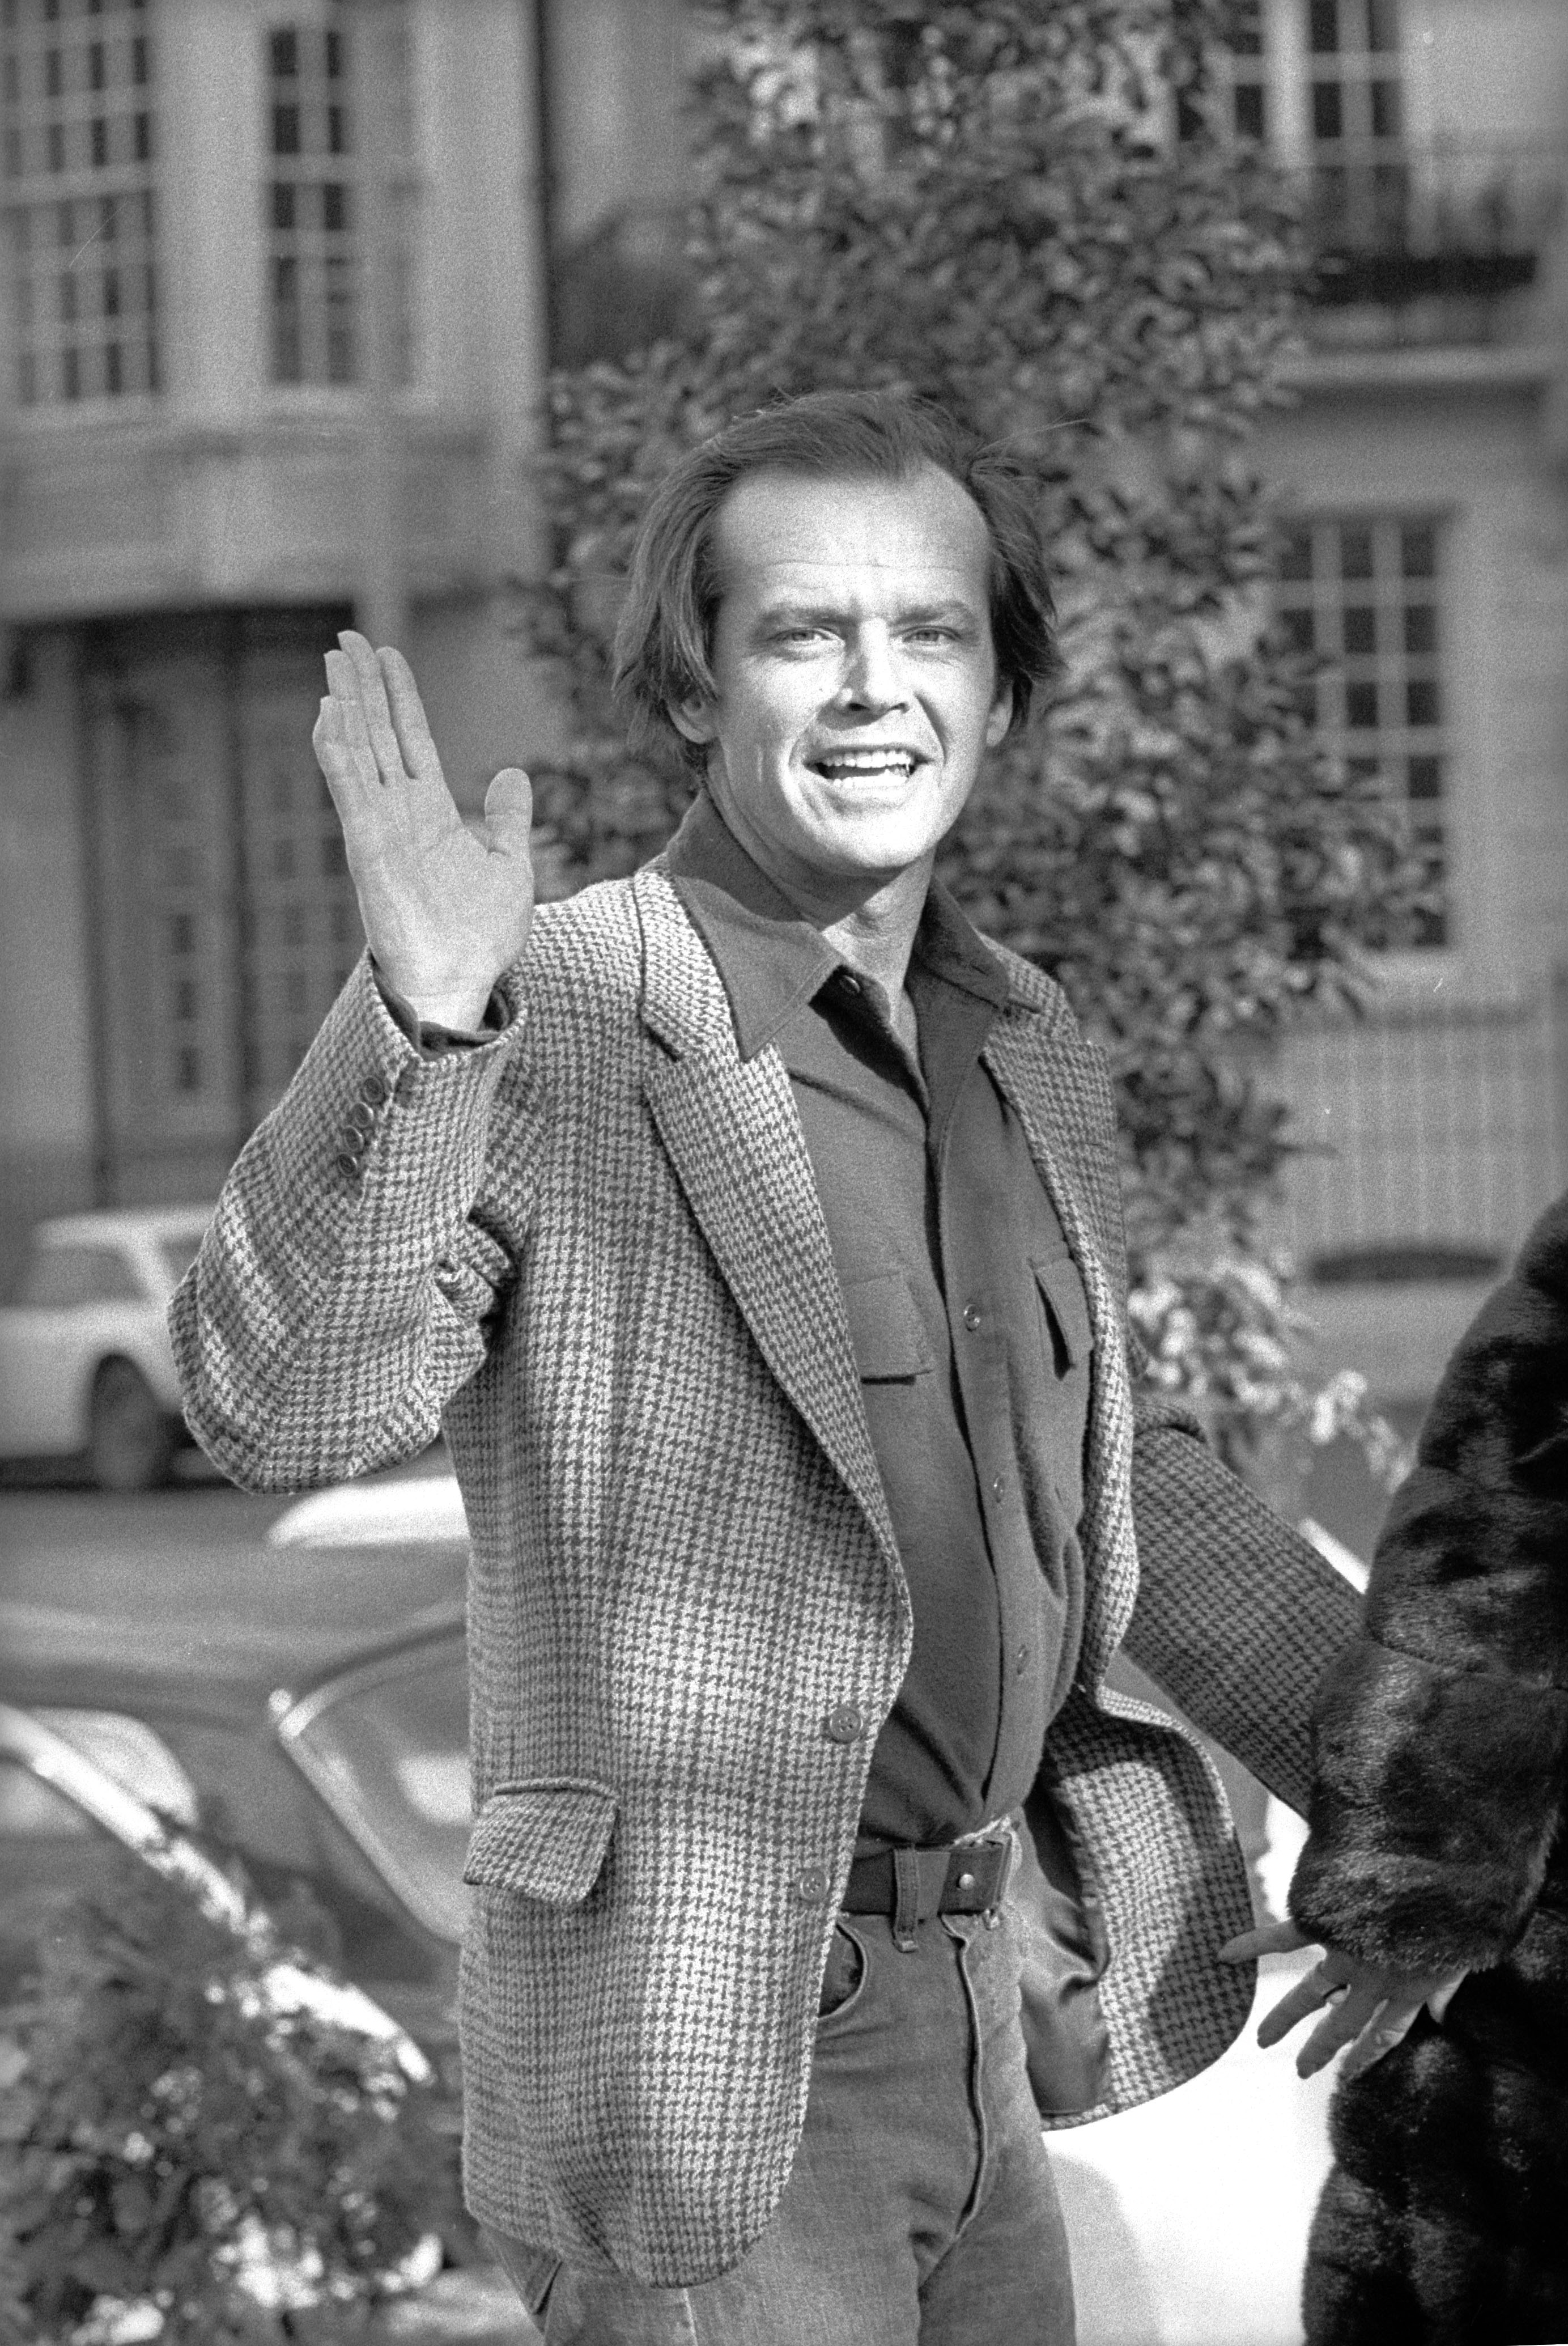 Jack Nicholson Is a Father of 5 Kids - Meet All of Them